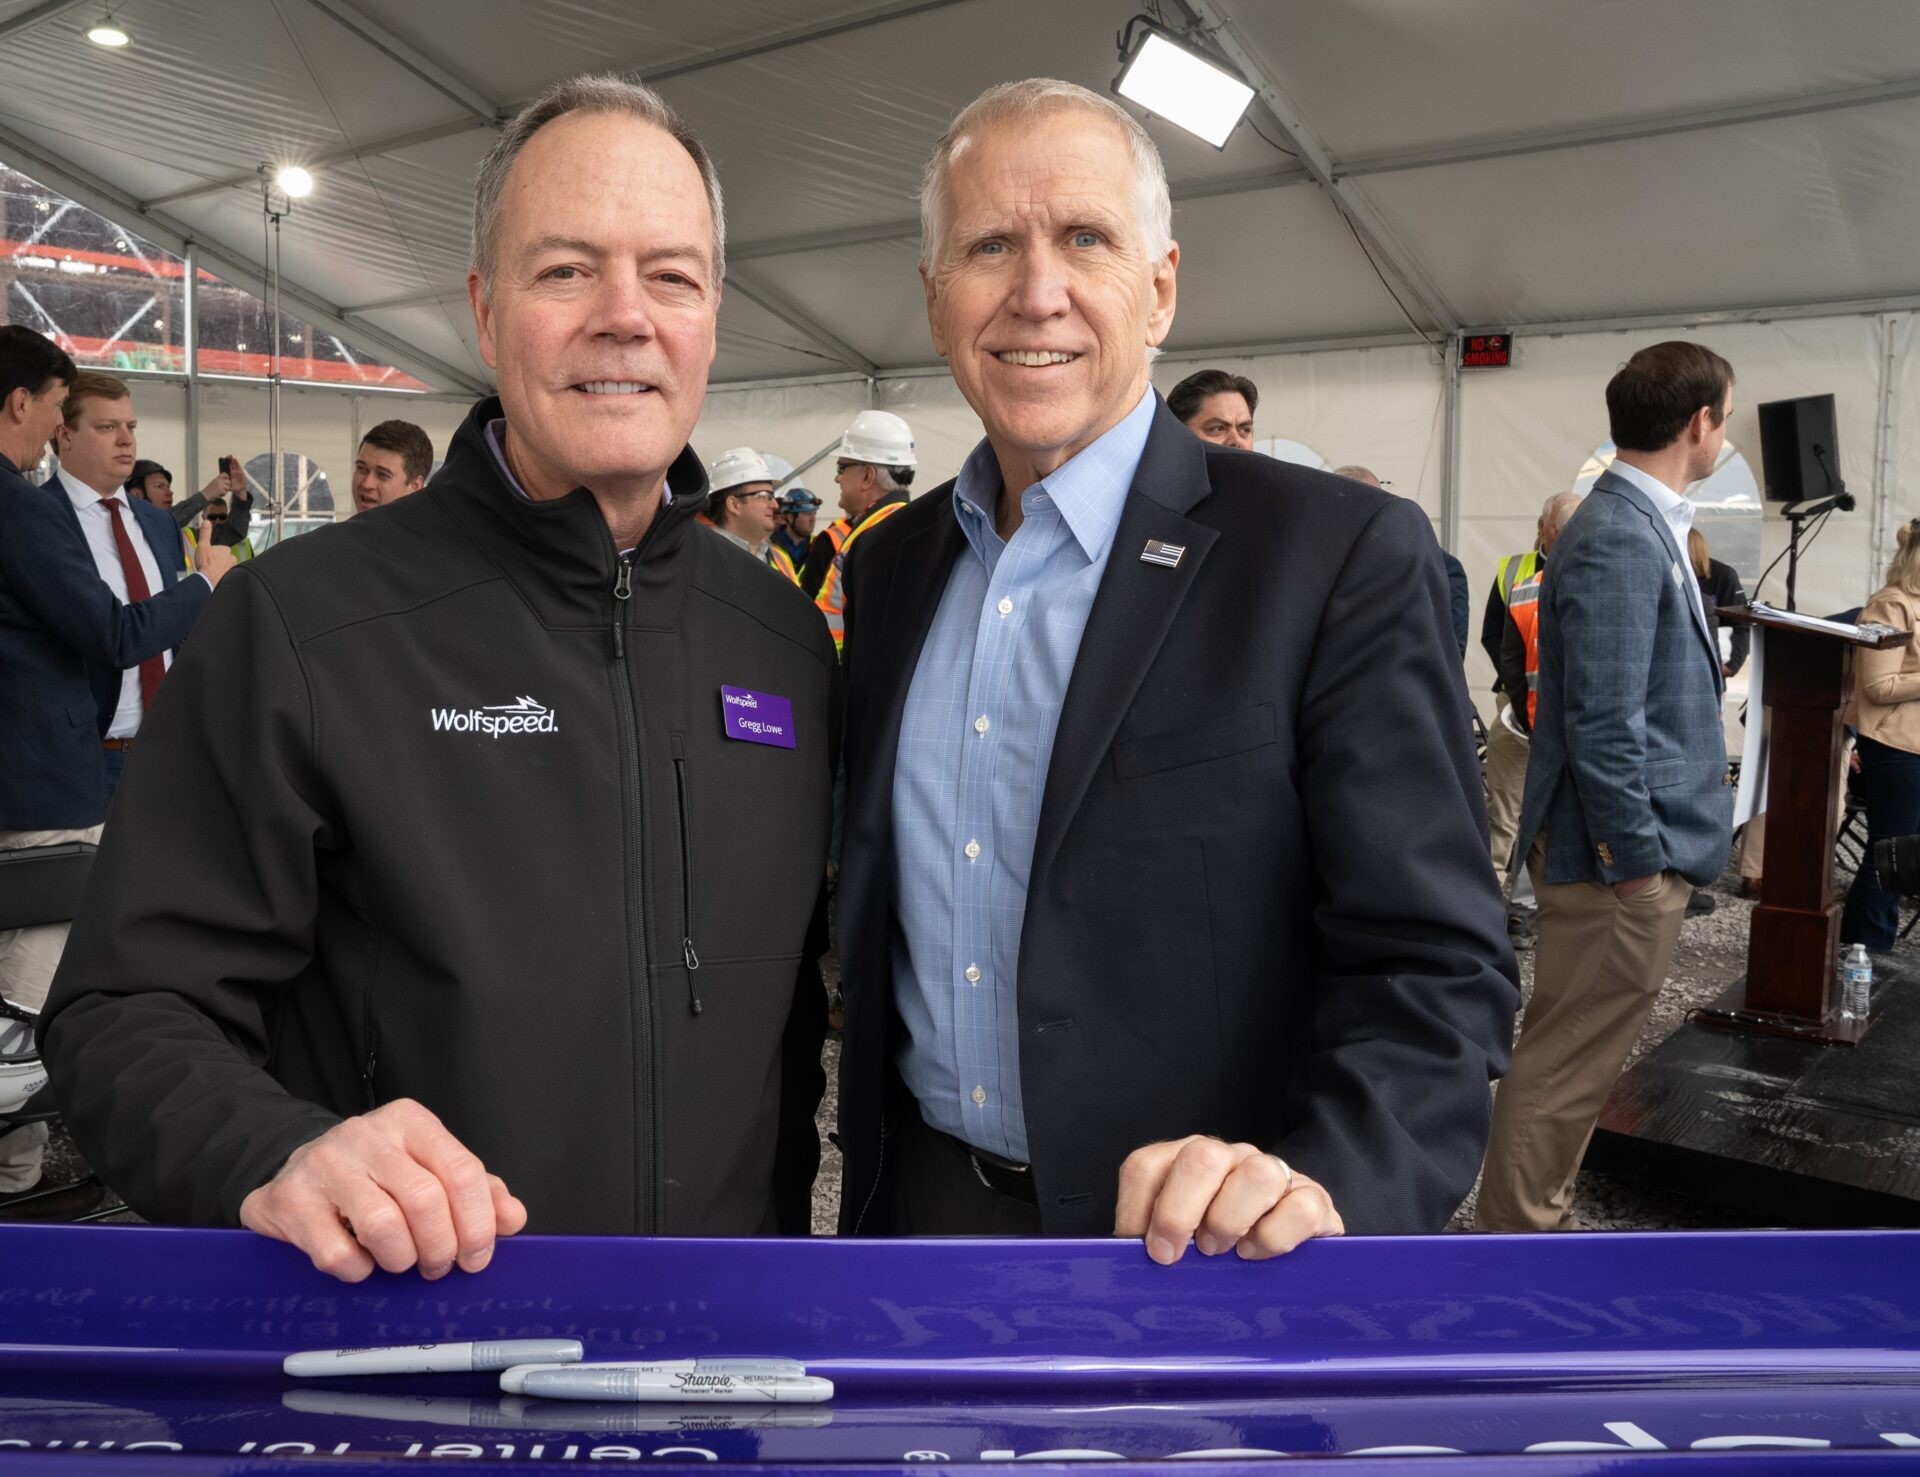 Senator Thom Tillis (R-NC) joined Wolfspeed President and CEO Gregg Lowe in signing ceremonial “last beam” at the Topping Out ceremony for The John Palmour Manufacturing Center for Silicon Carbide